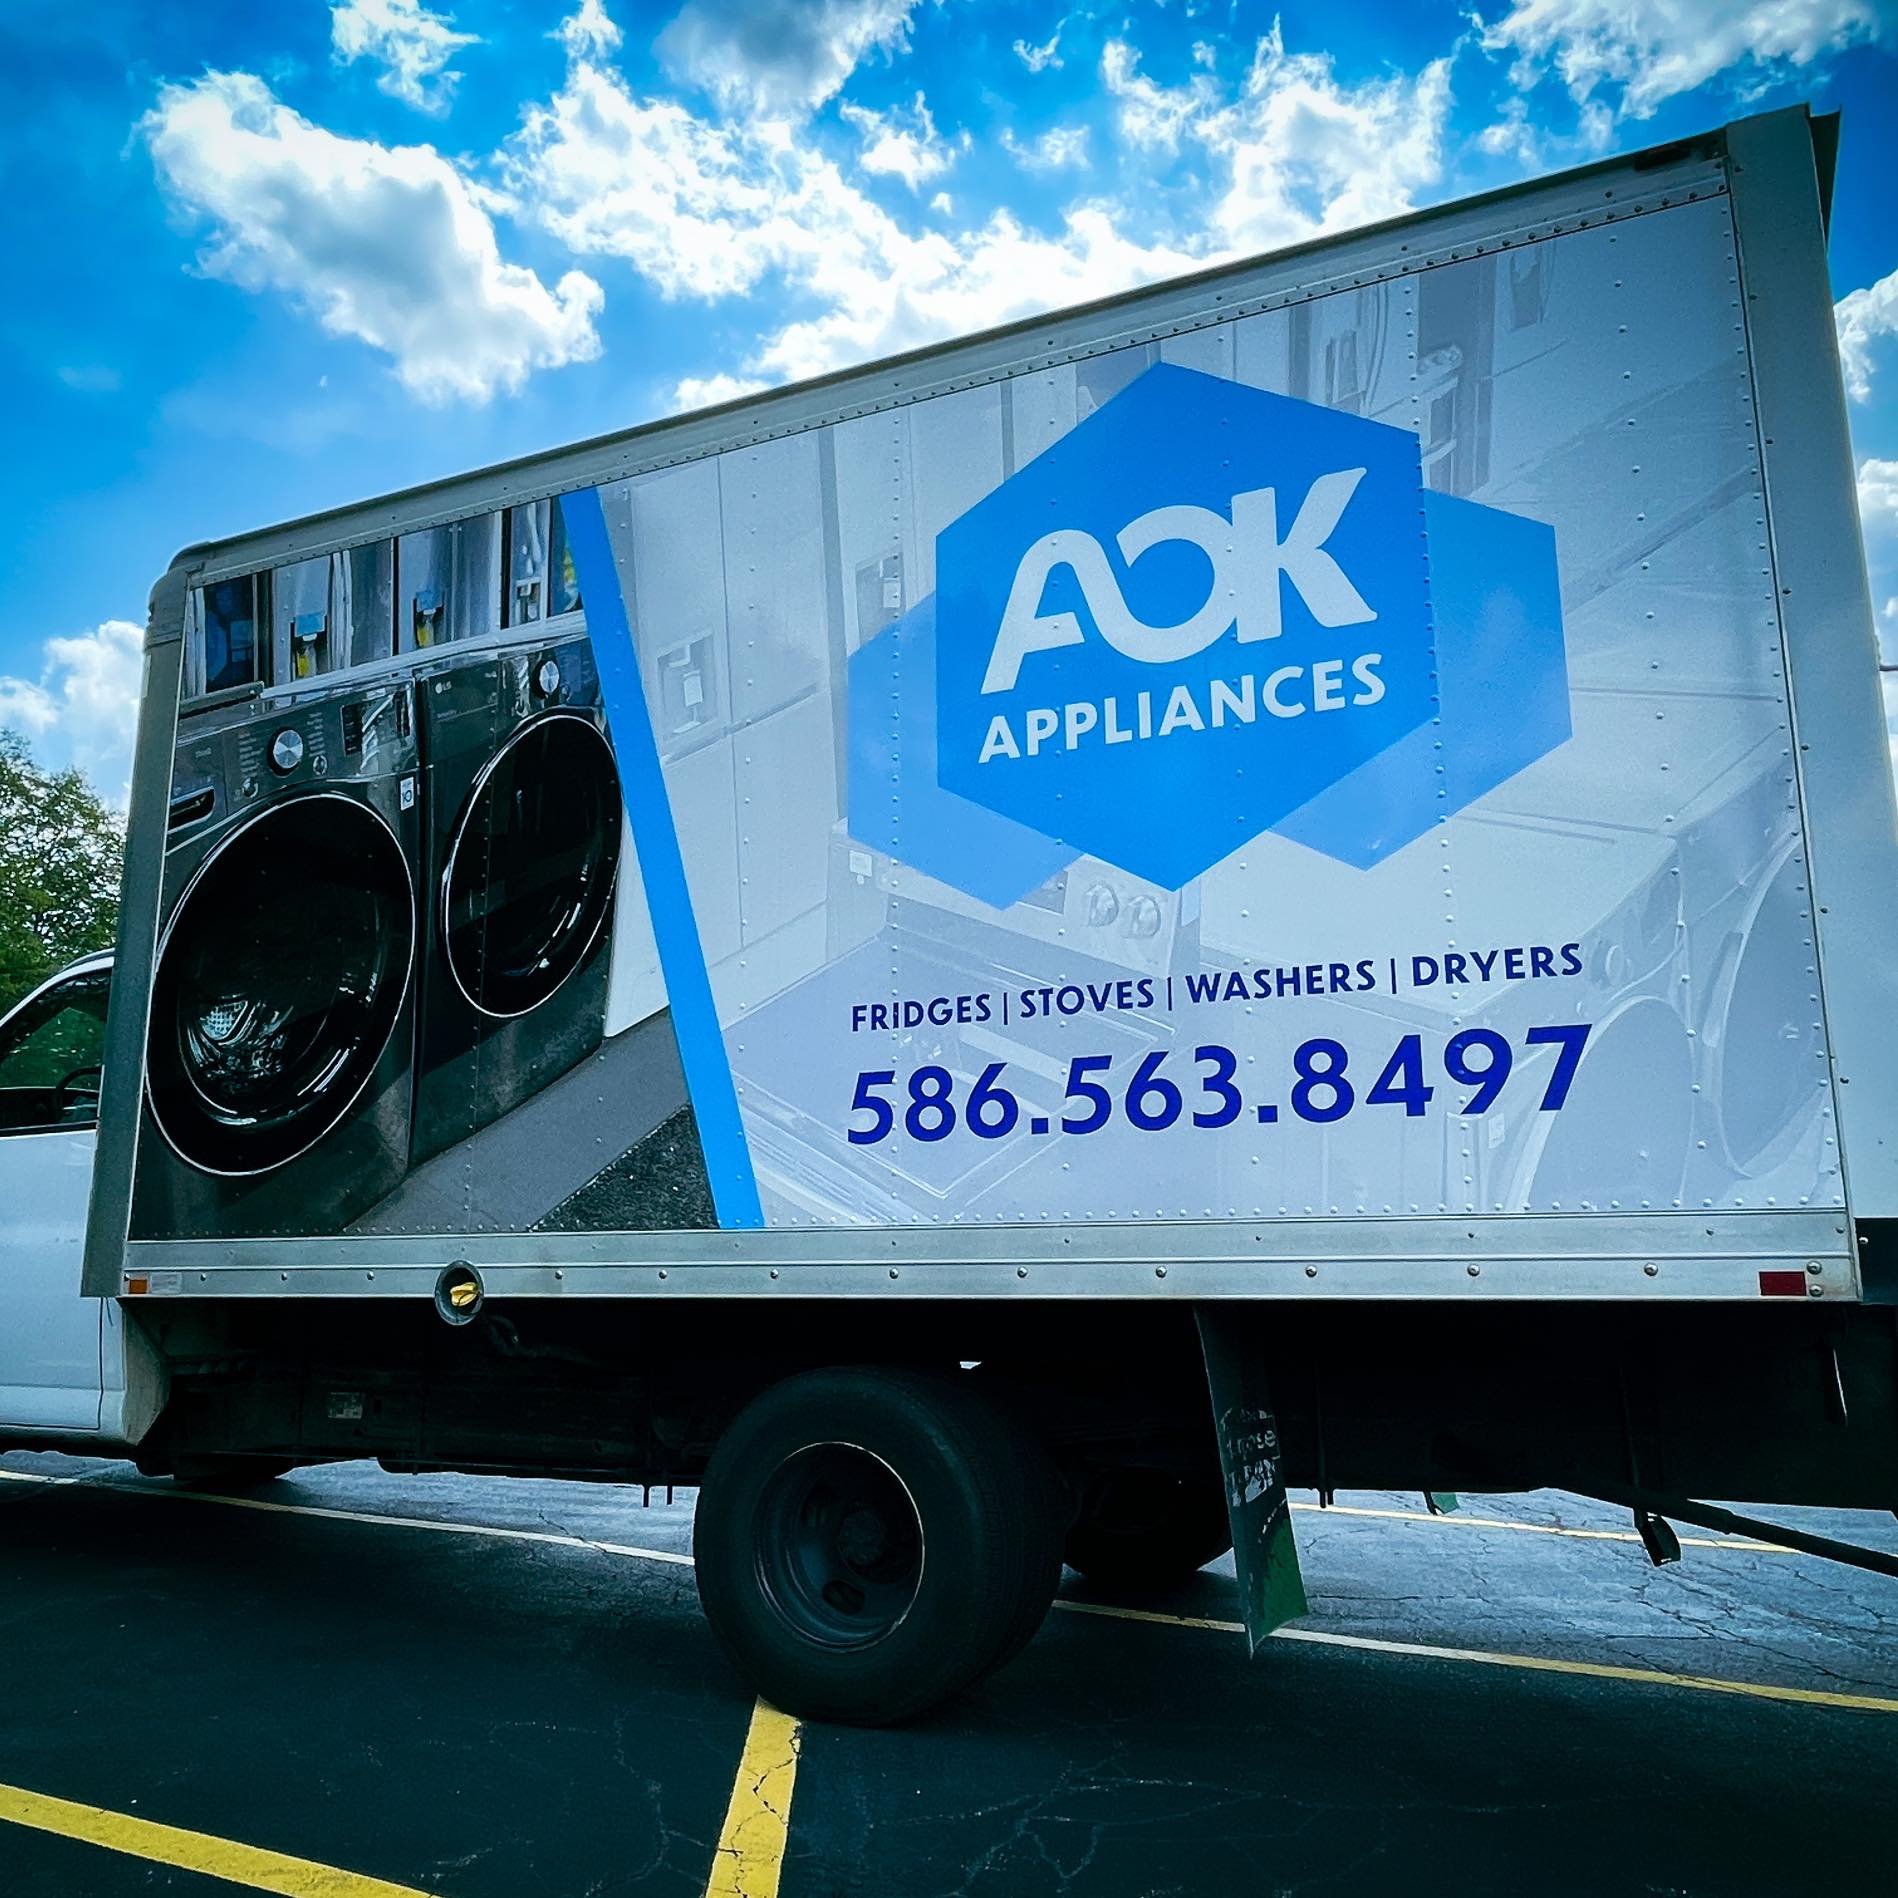 AOK Appliances - Free Delivery